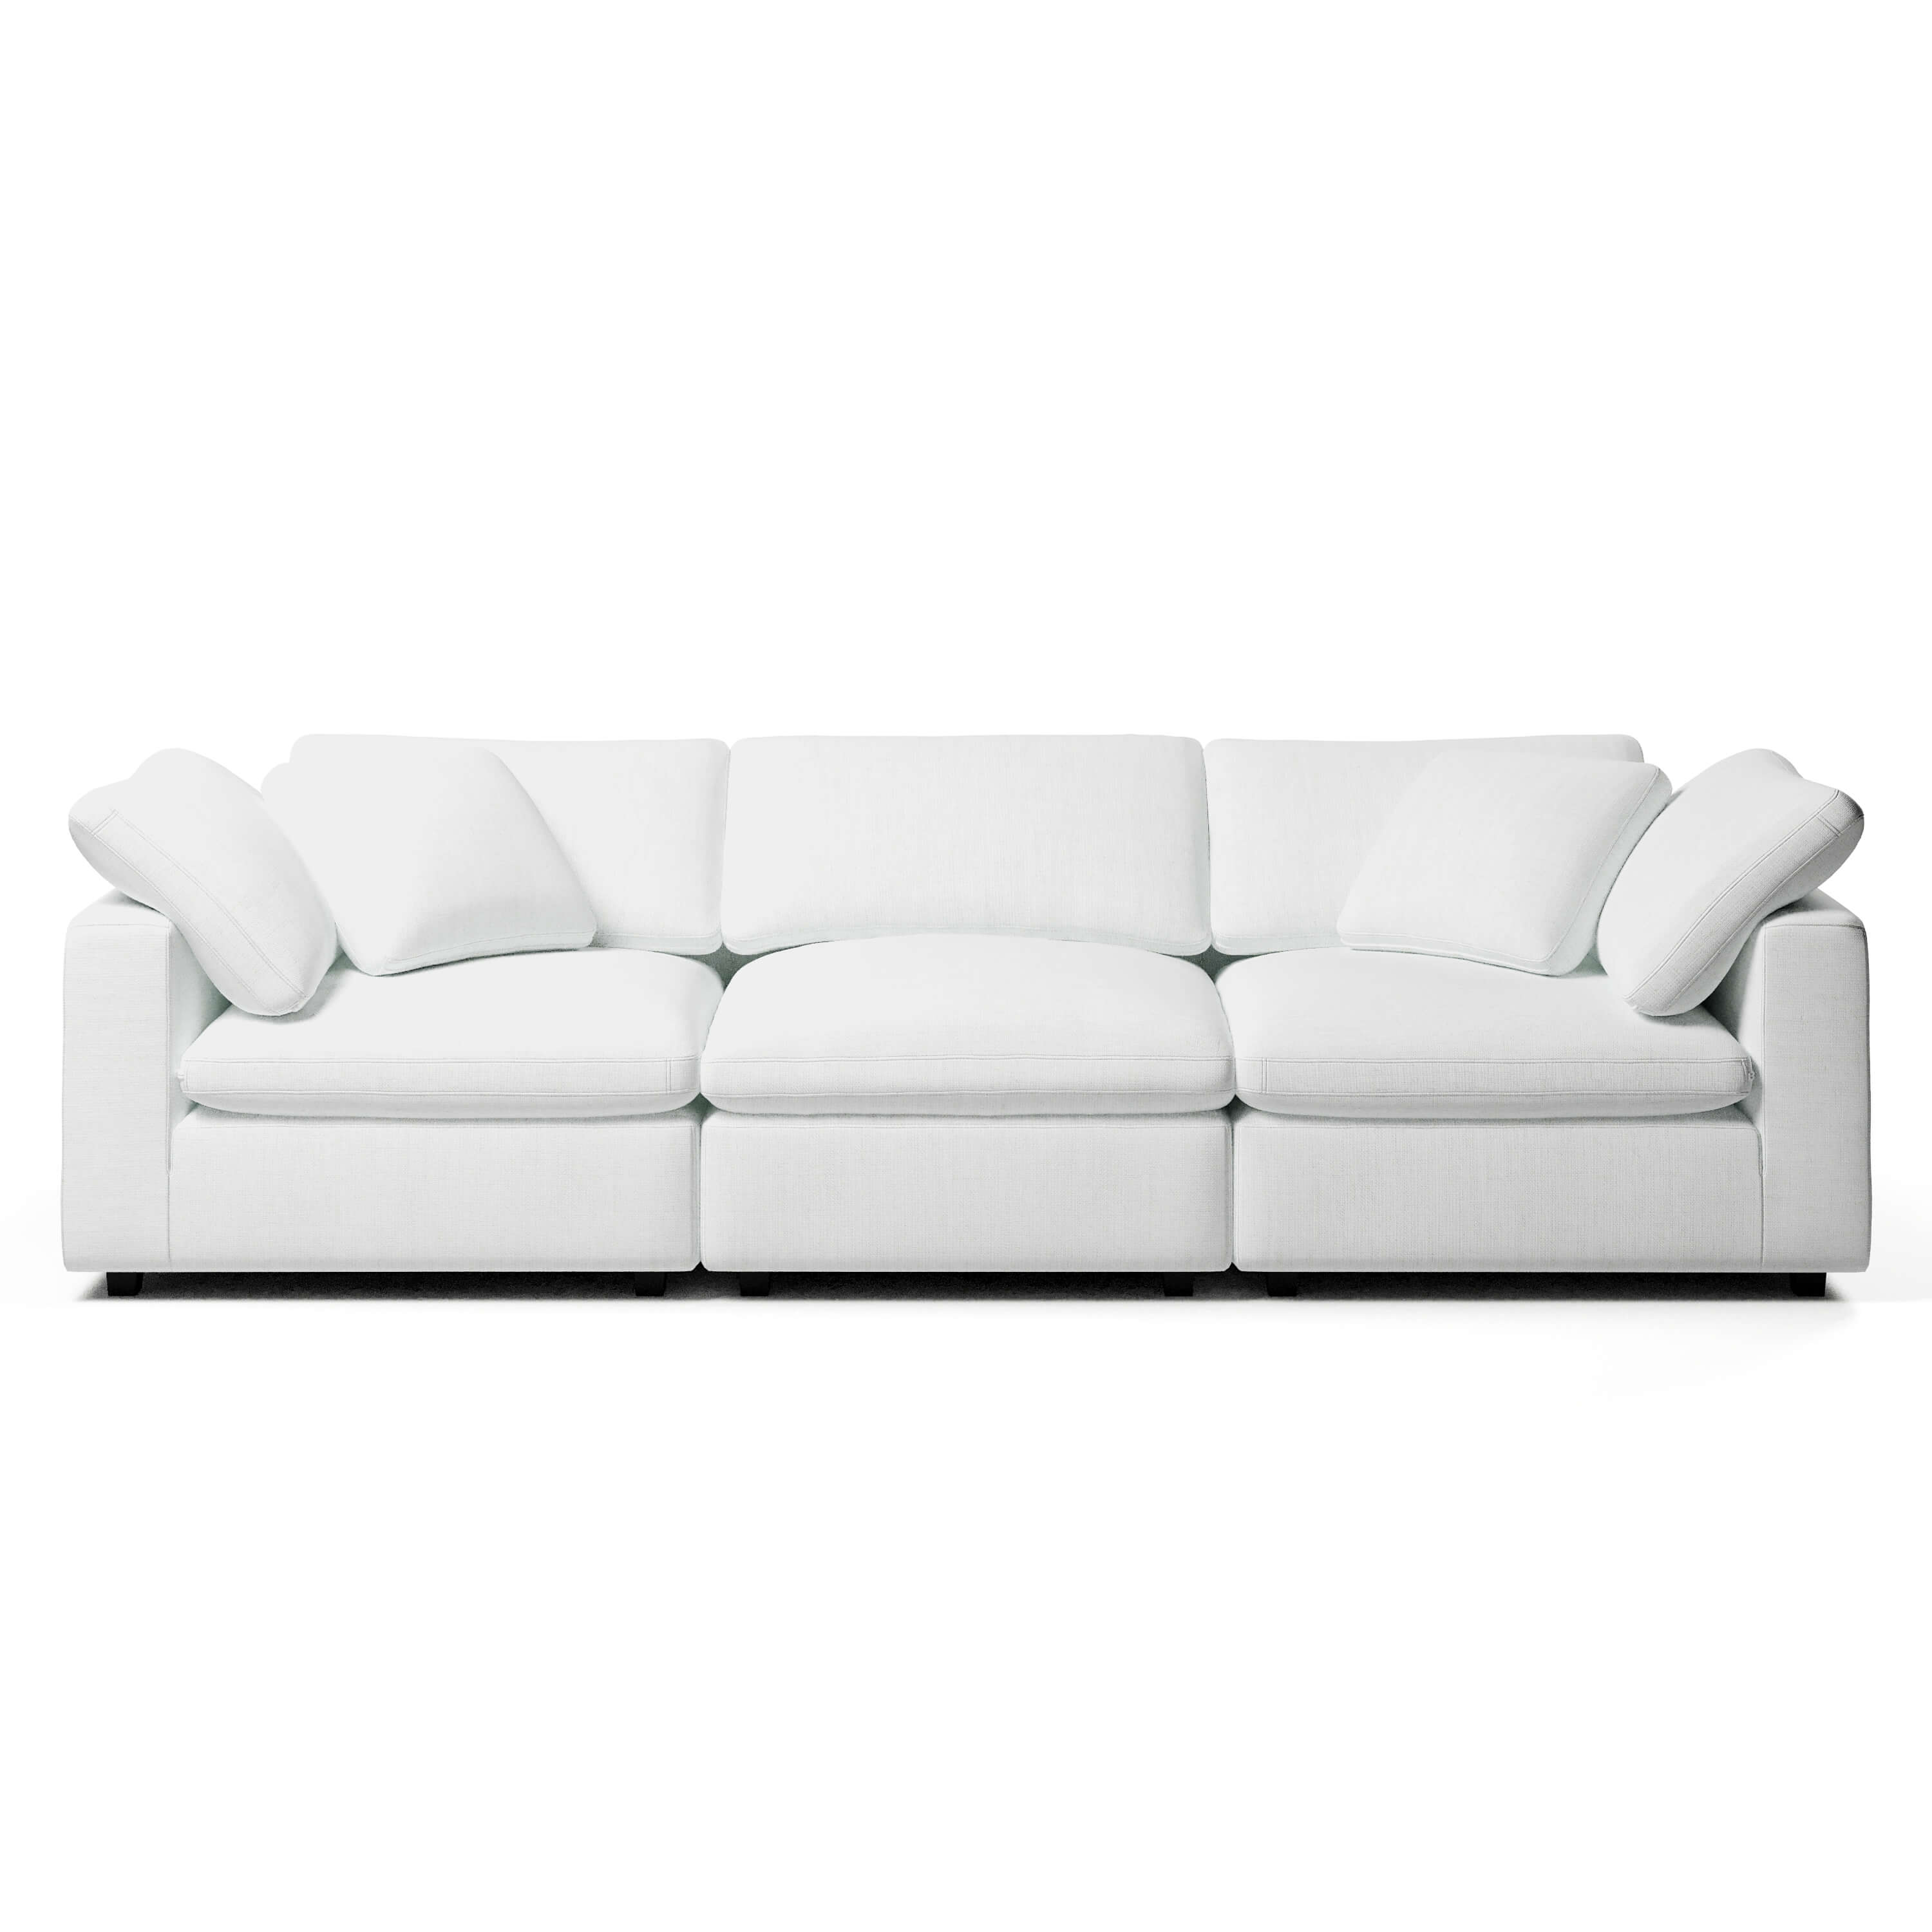 In Stock - Comfy Three Seater